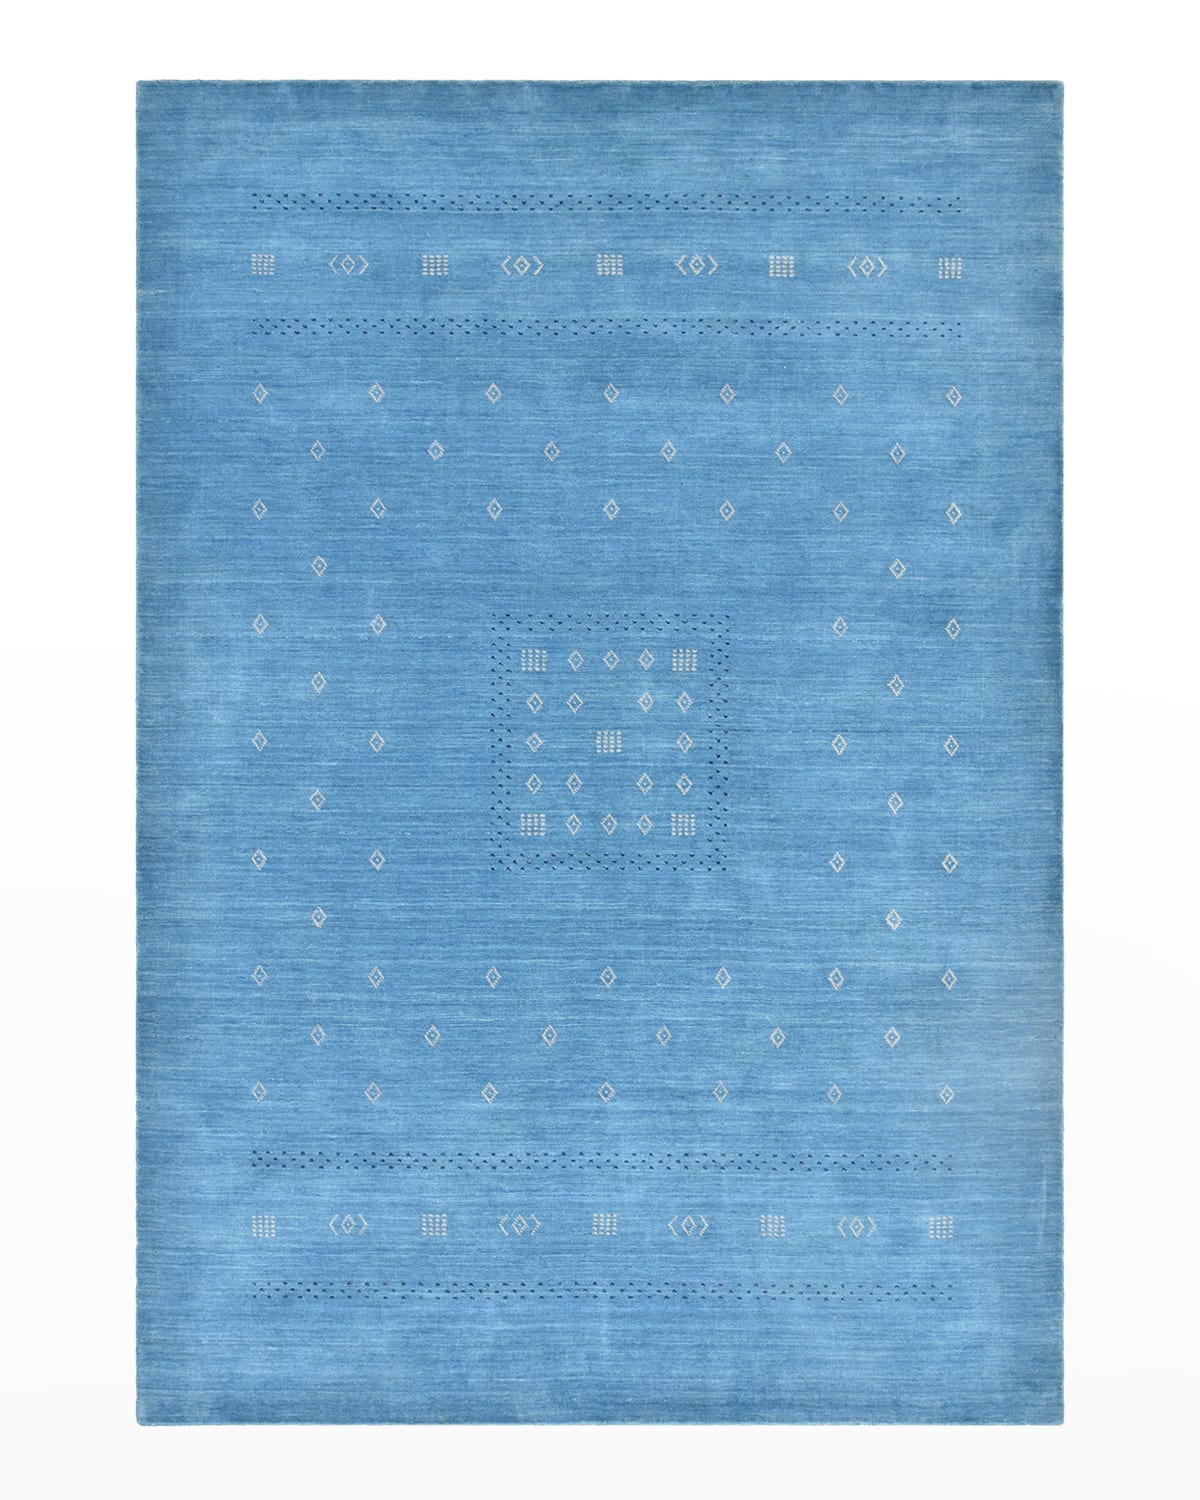 Solo Rugs Simi Hand-loomed Rug, Sapphire - 5' X 8'